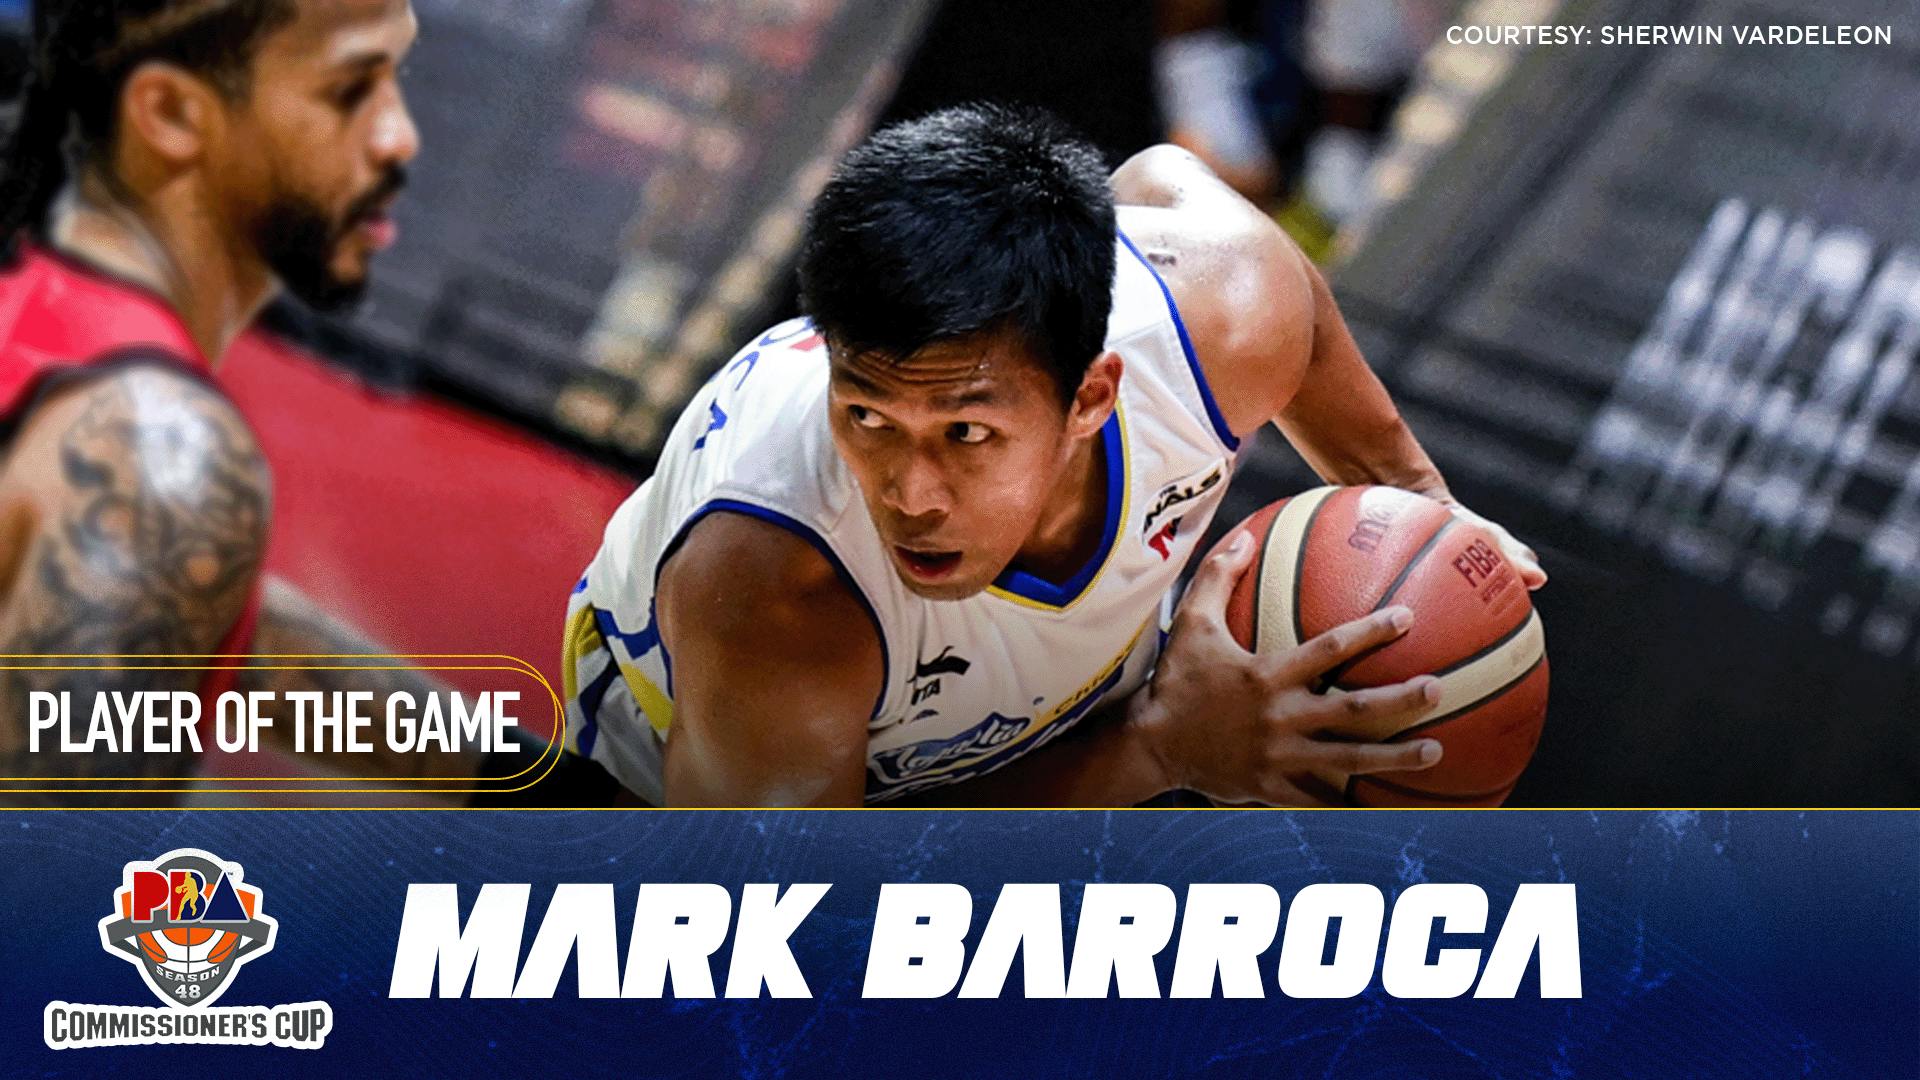 PBA: Mark Barroca spearheads Magnolia charge for Game 3 victory